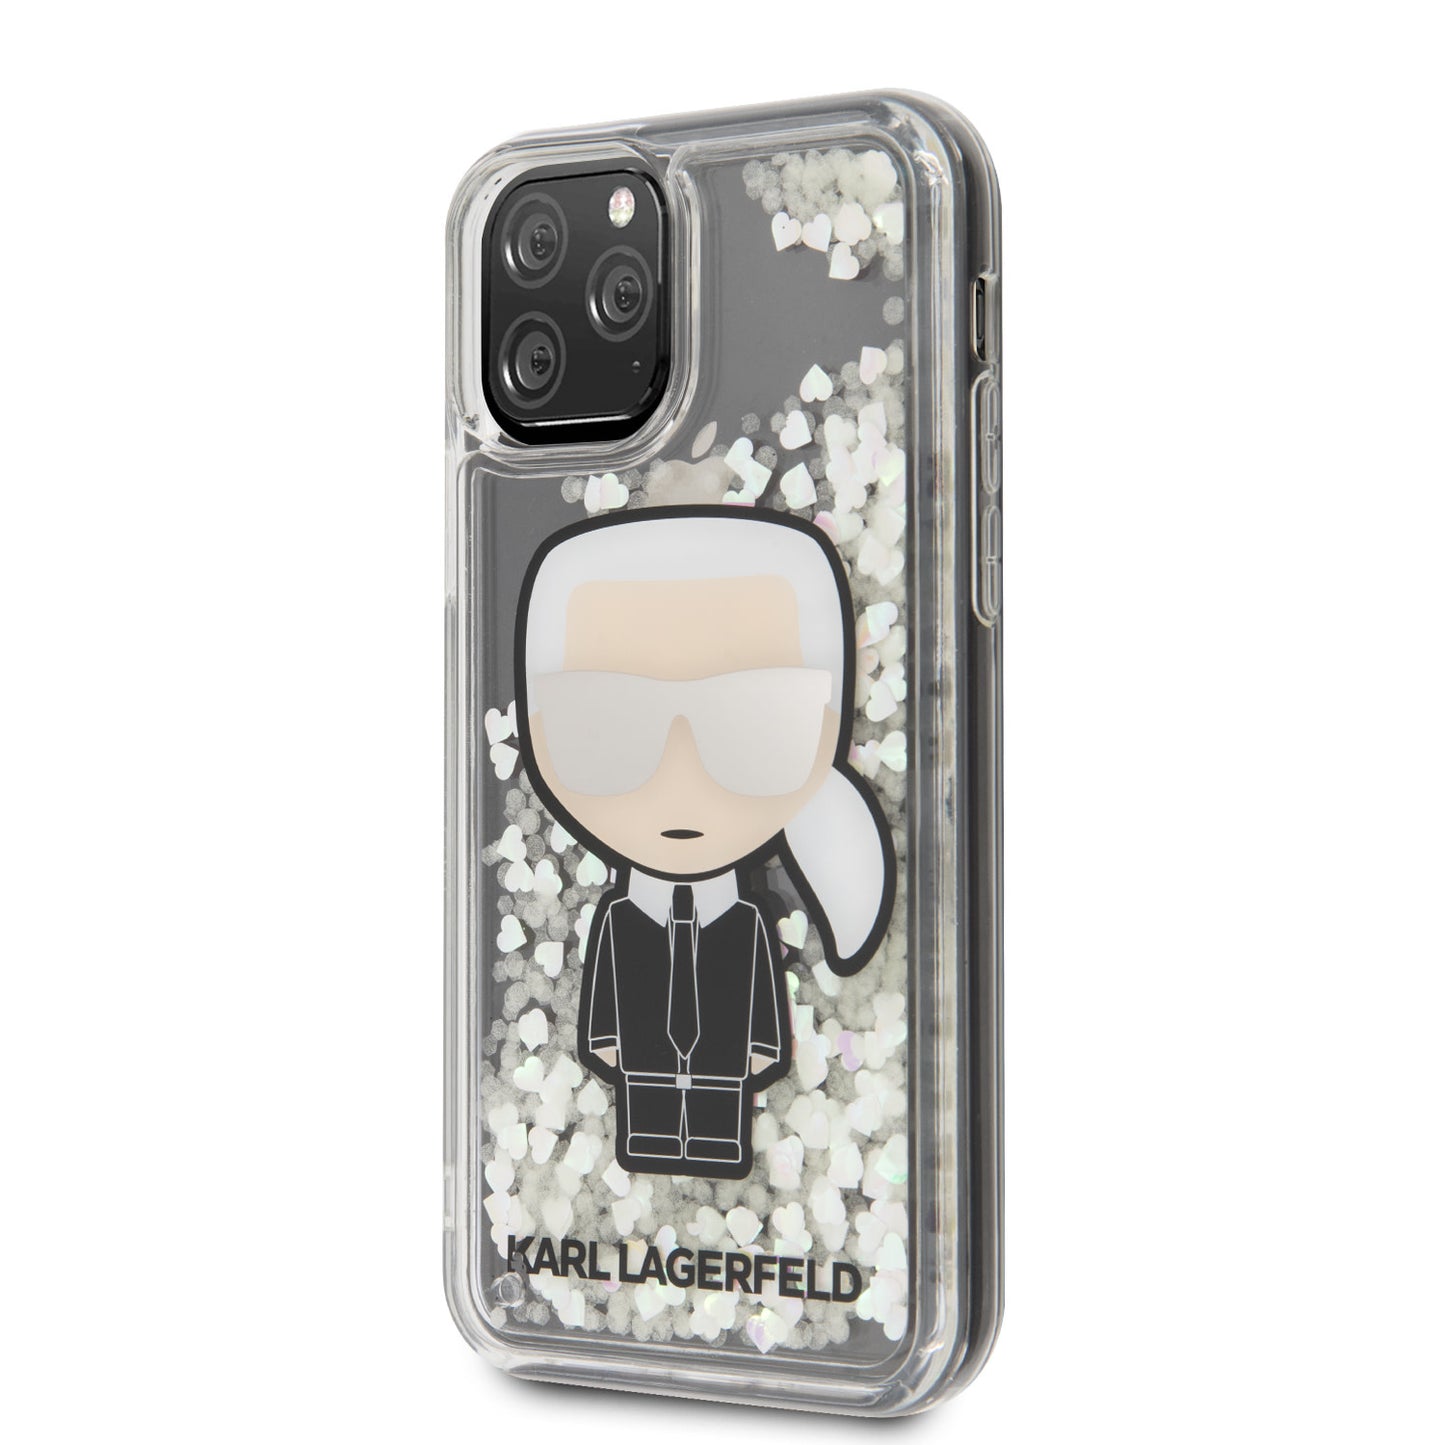 Karl Lagerfeld iPhone 11 PRO Backcover - Glitter - Glow in the dark - Transparant